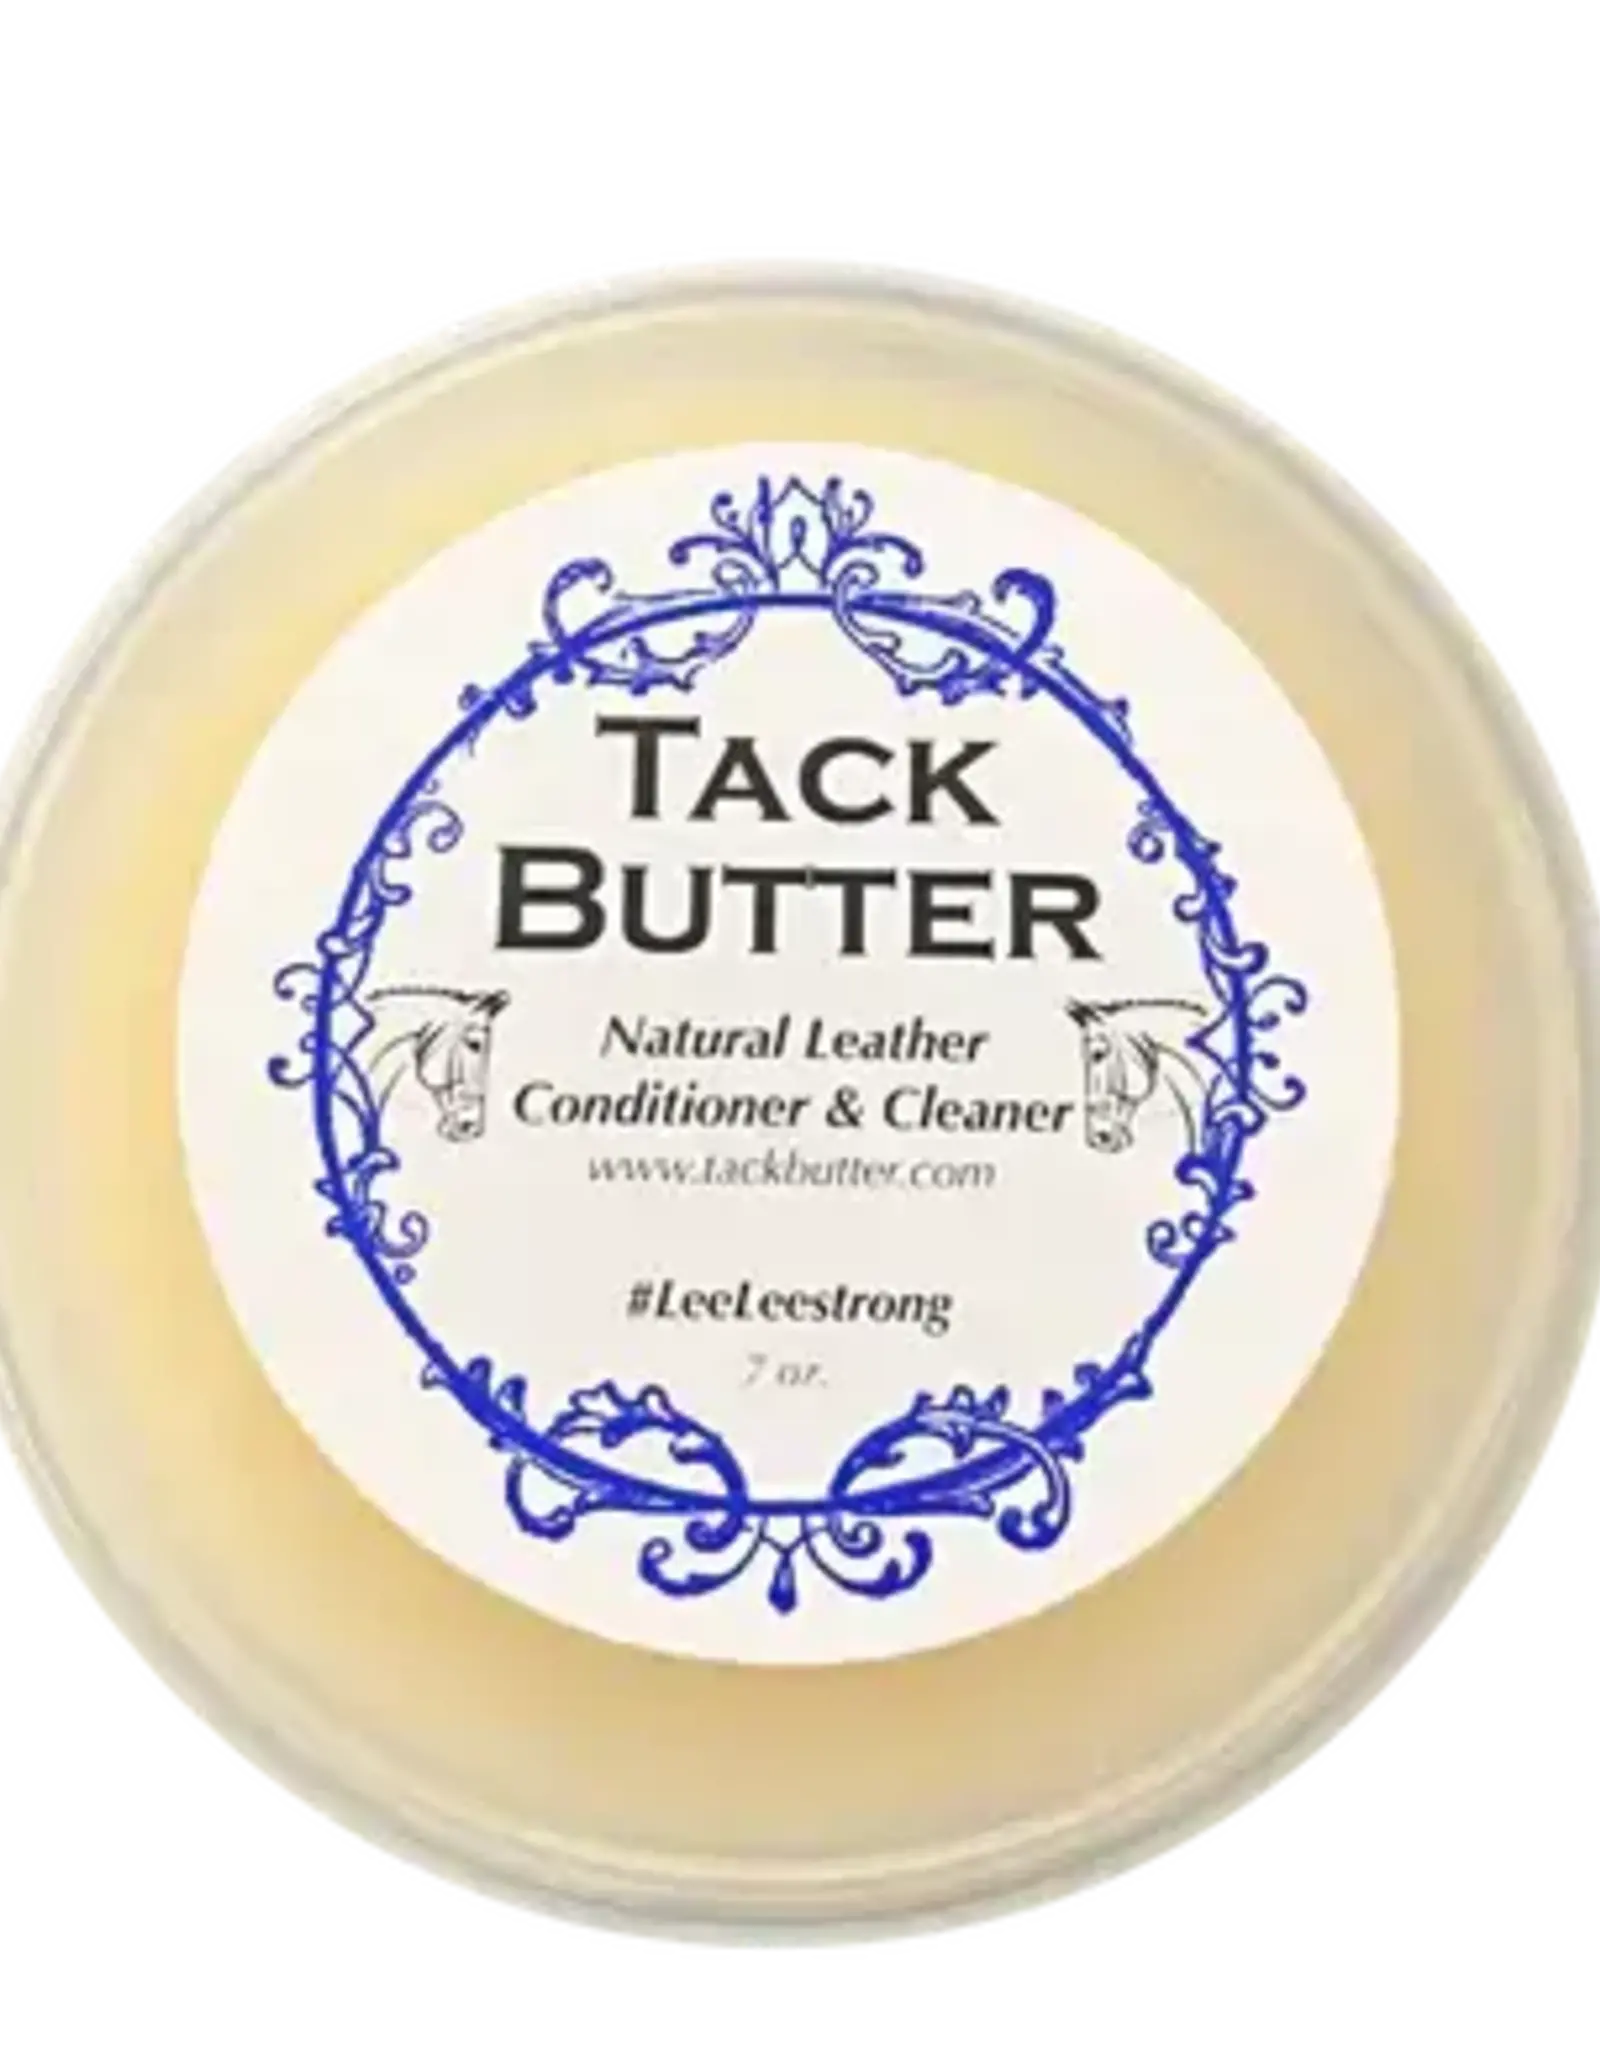 Tack Butter 7oz